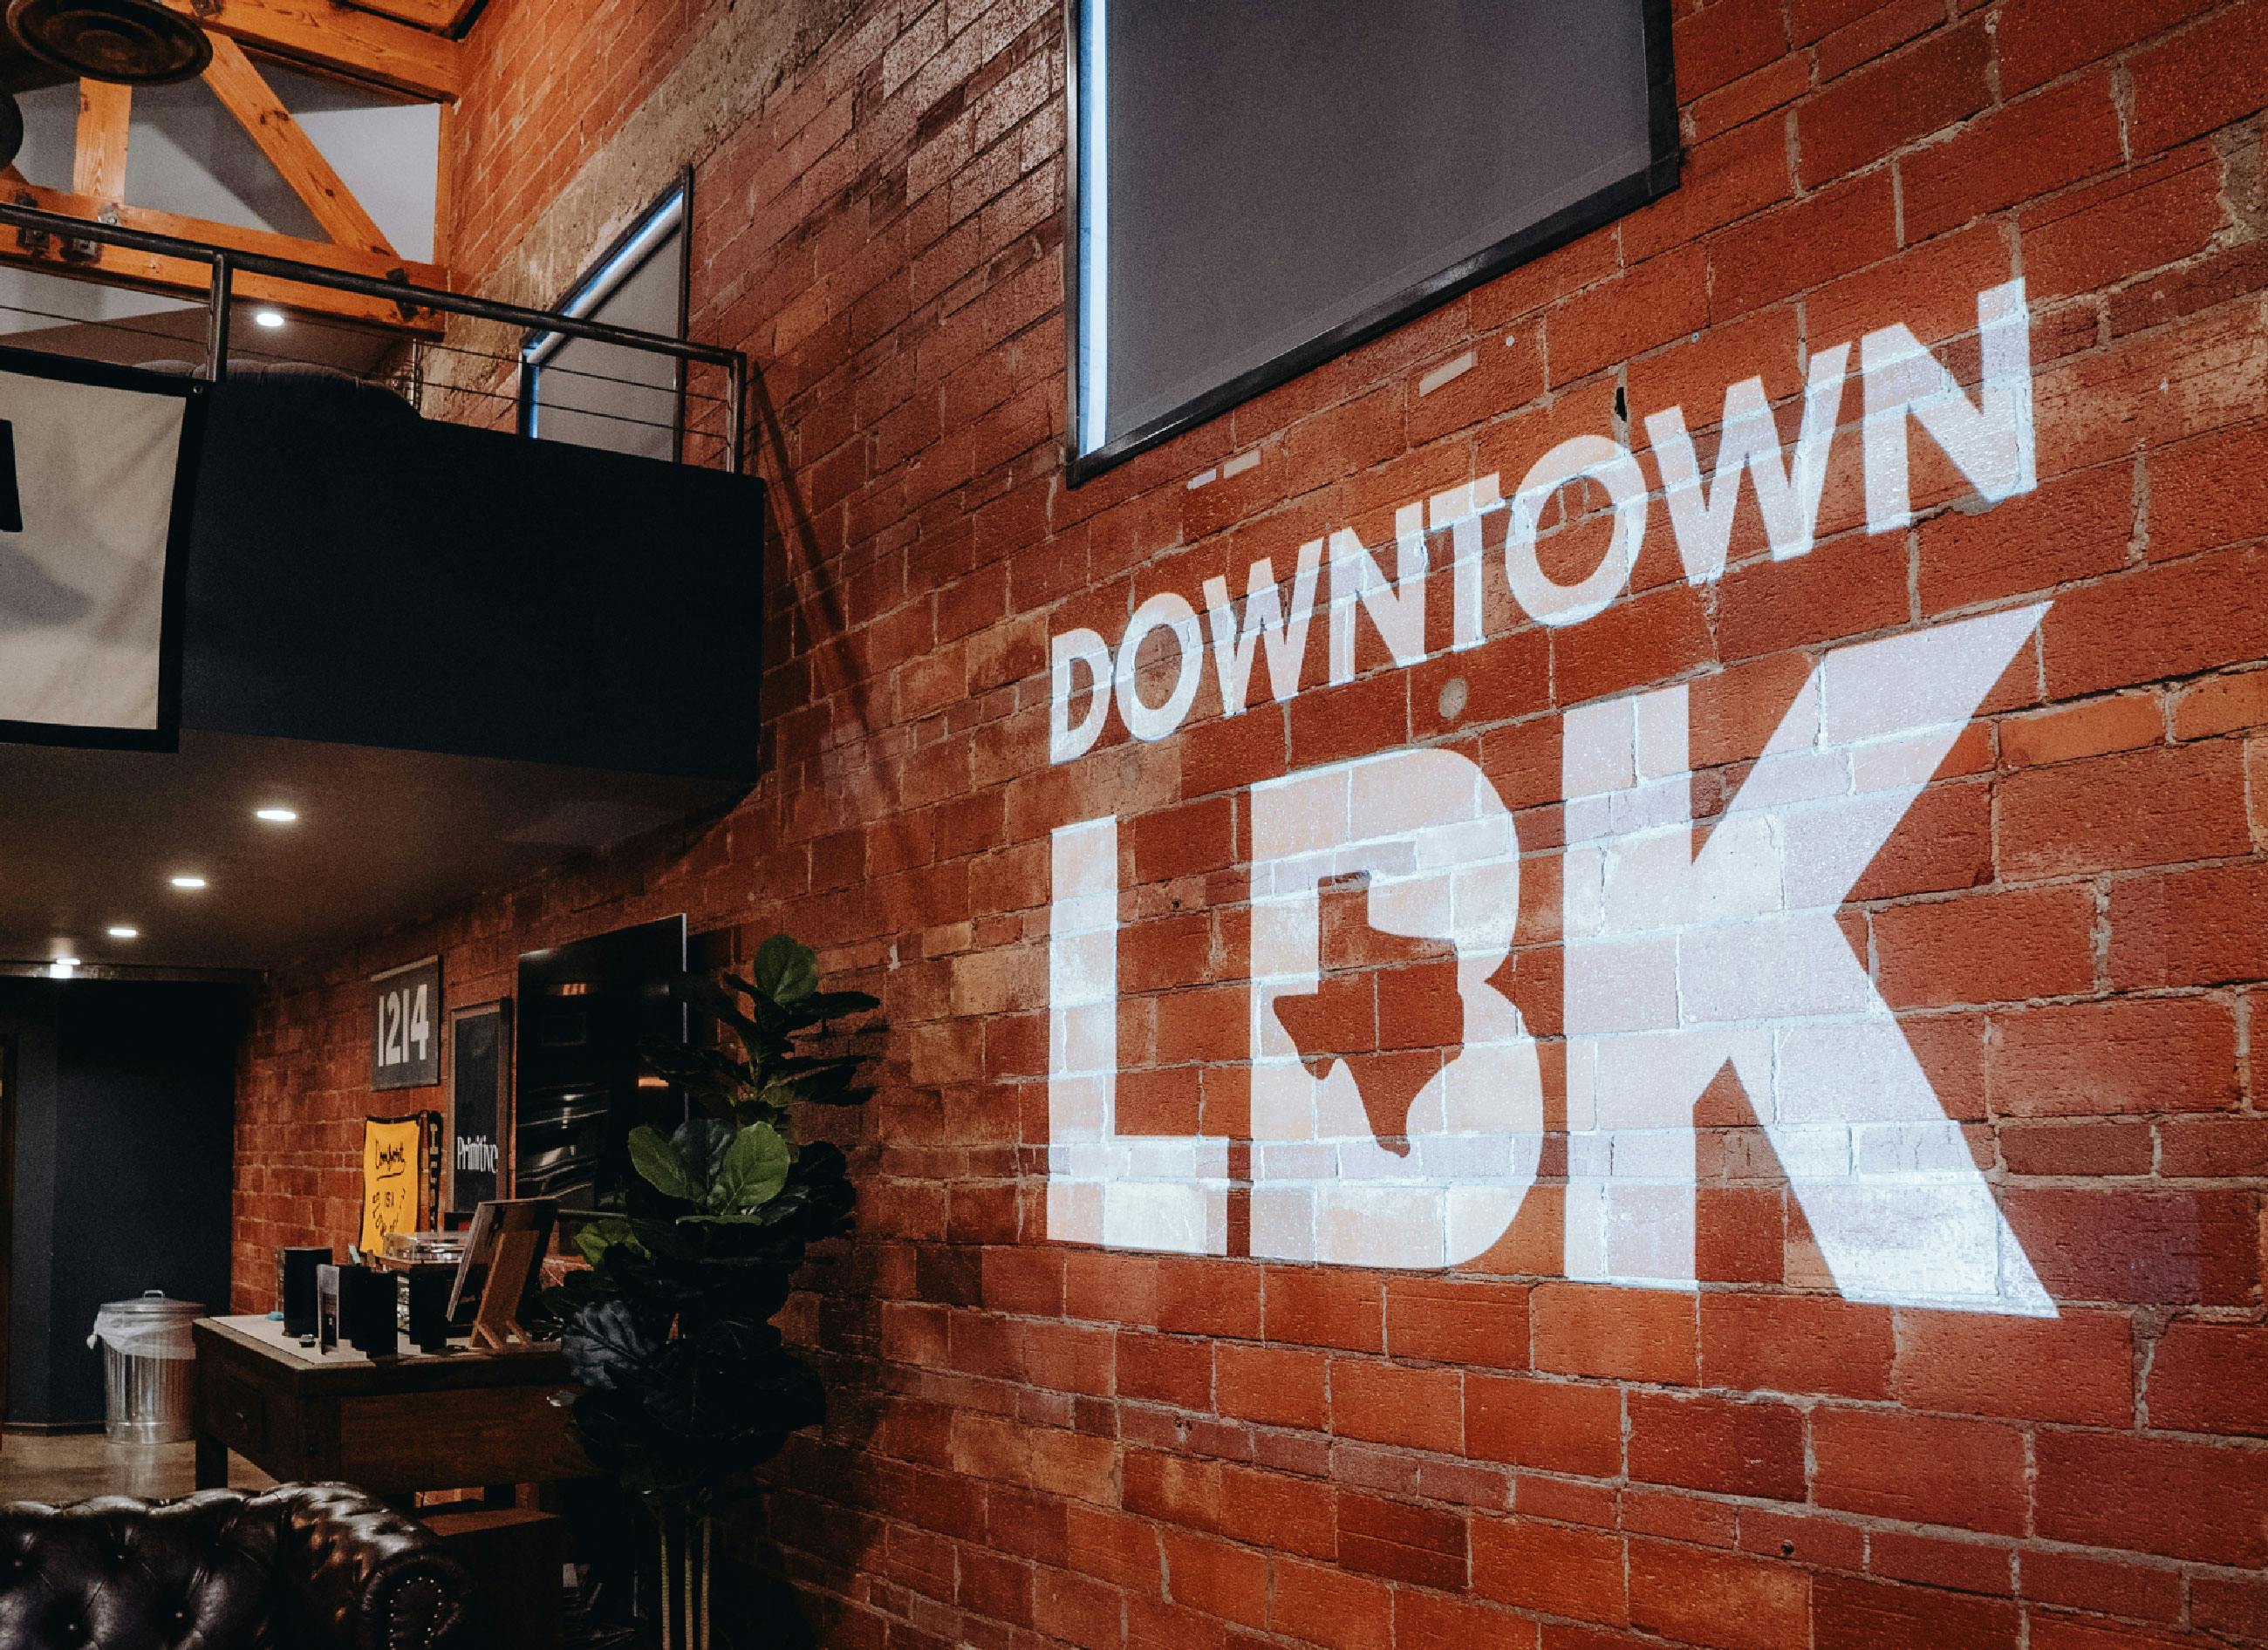 Made Possible By You. Built For You: Downtown LBK’s New Look